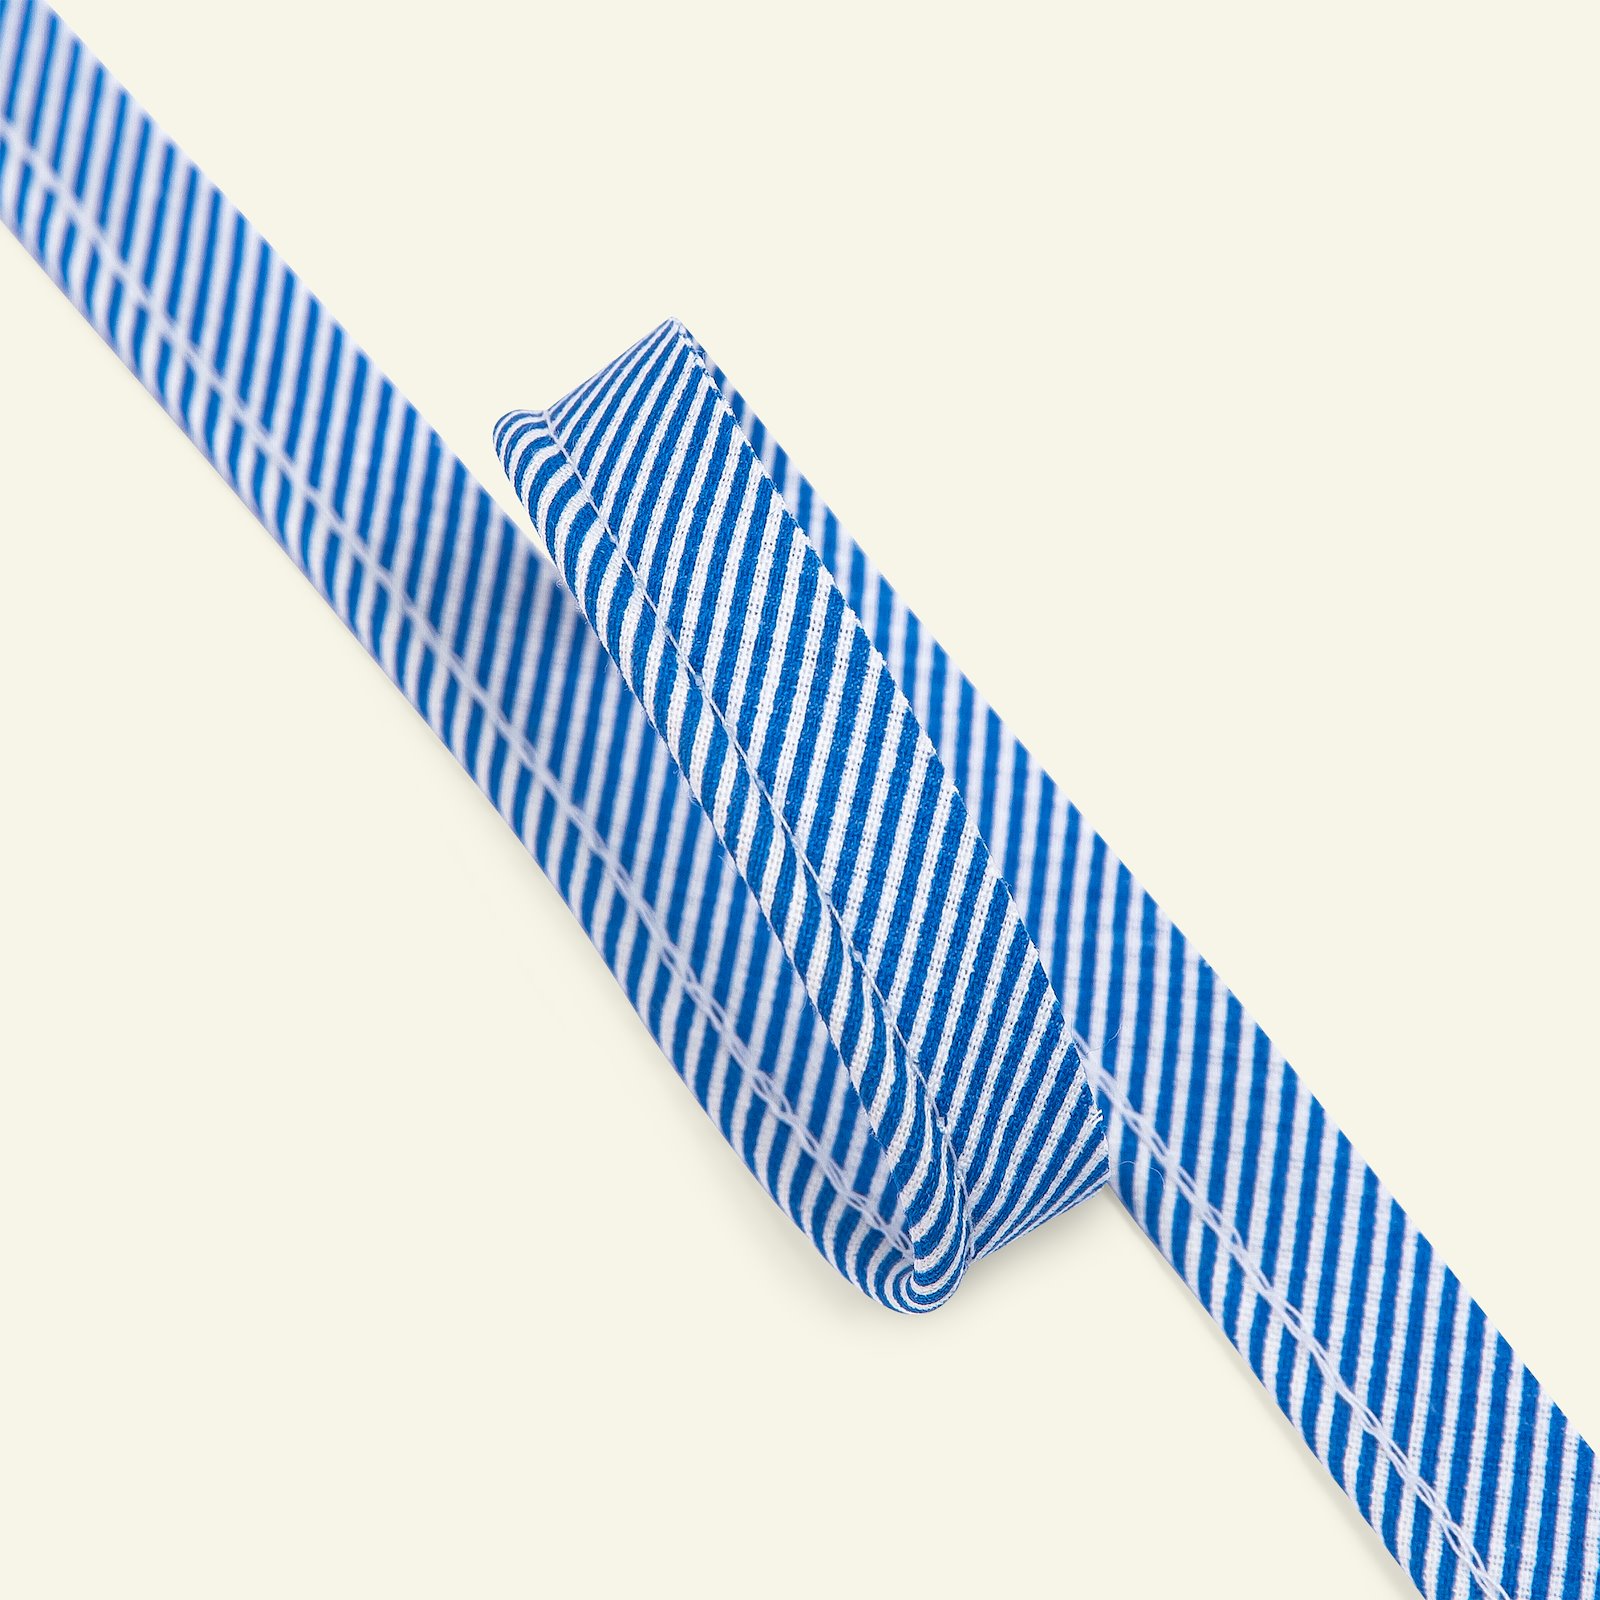 Piping 4mm 1mm stripes blue/white 3m 71309_pack